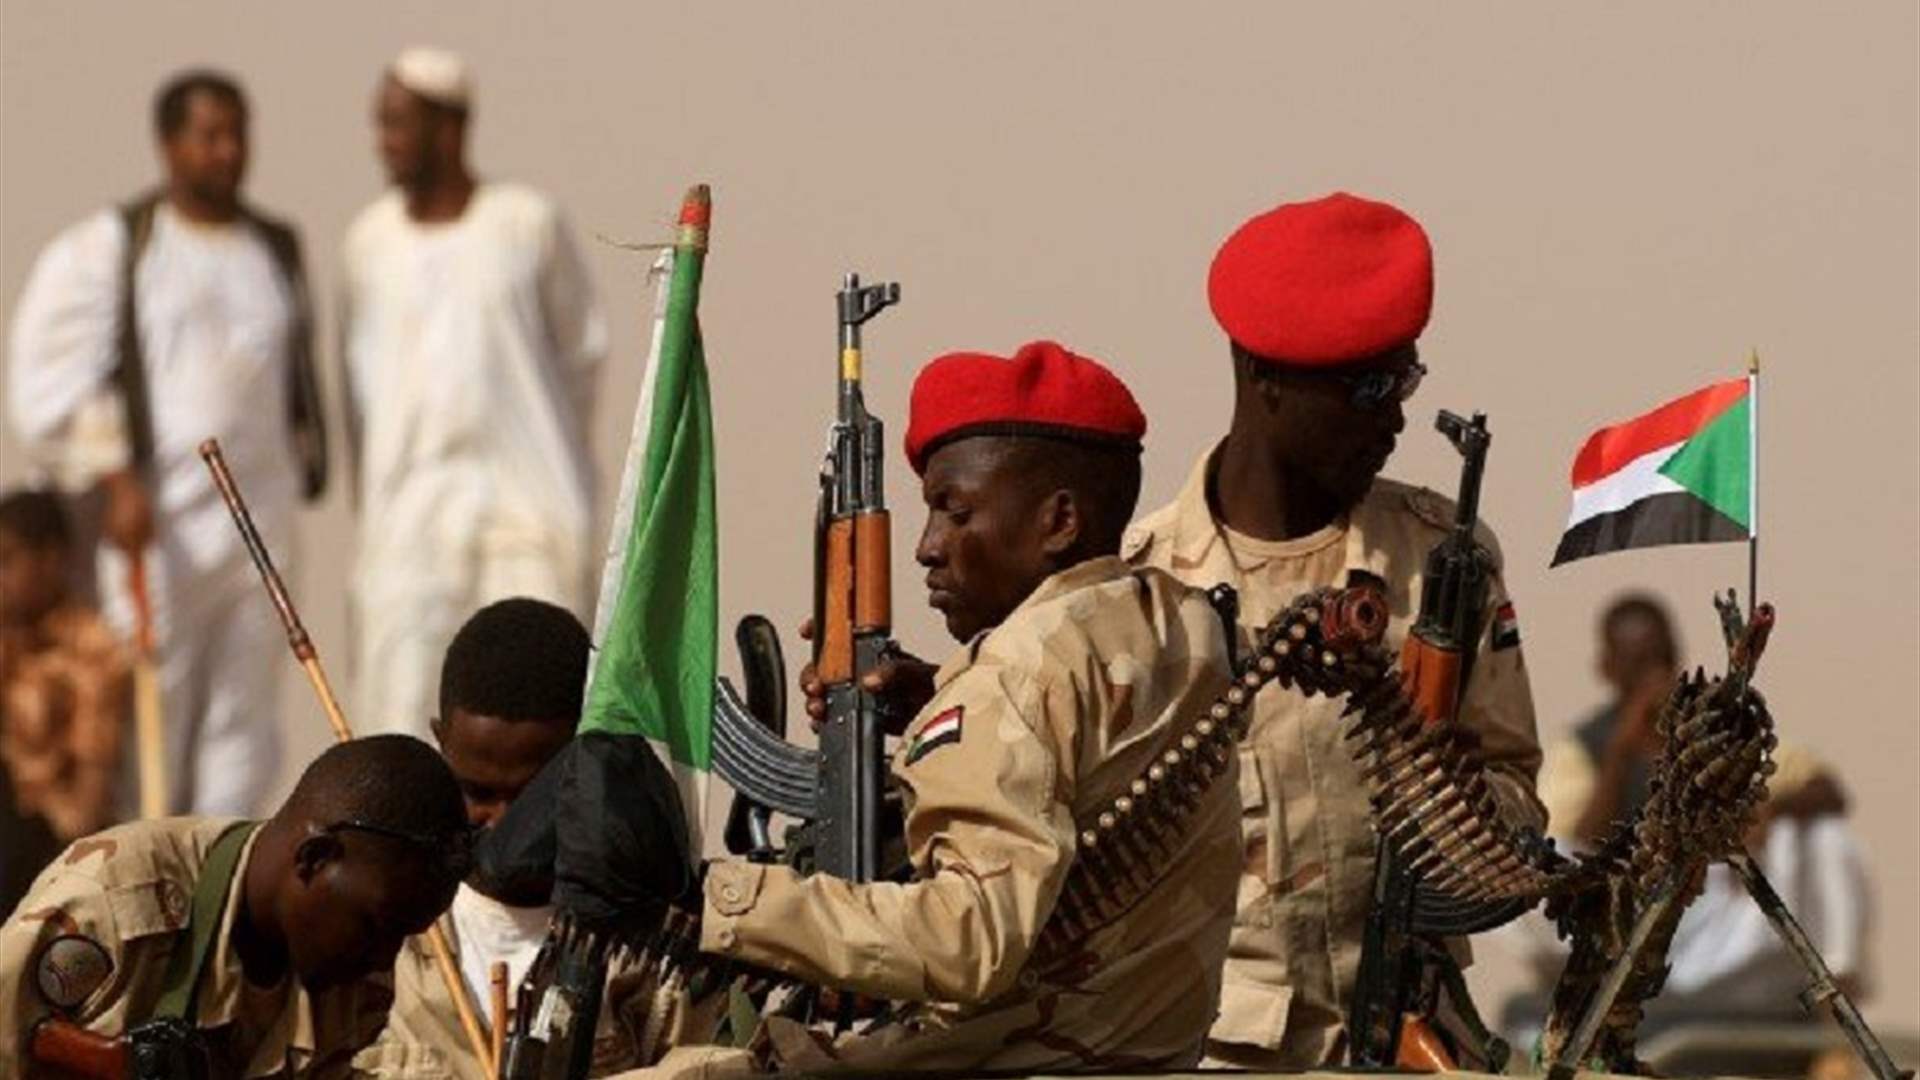 Sudanese Army Takeover and Peace Initiative: A Complex Landscape